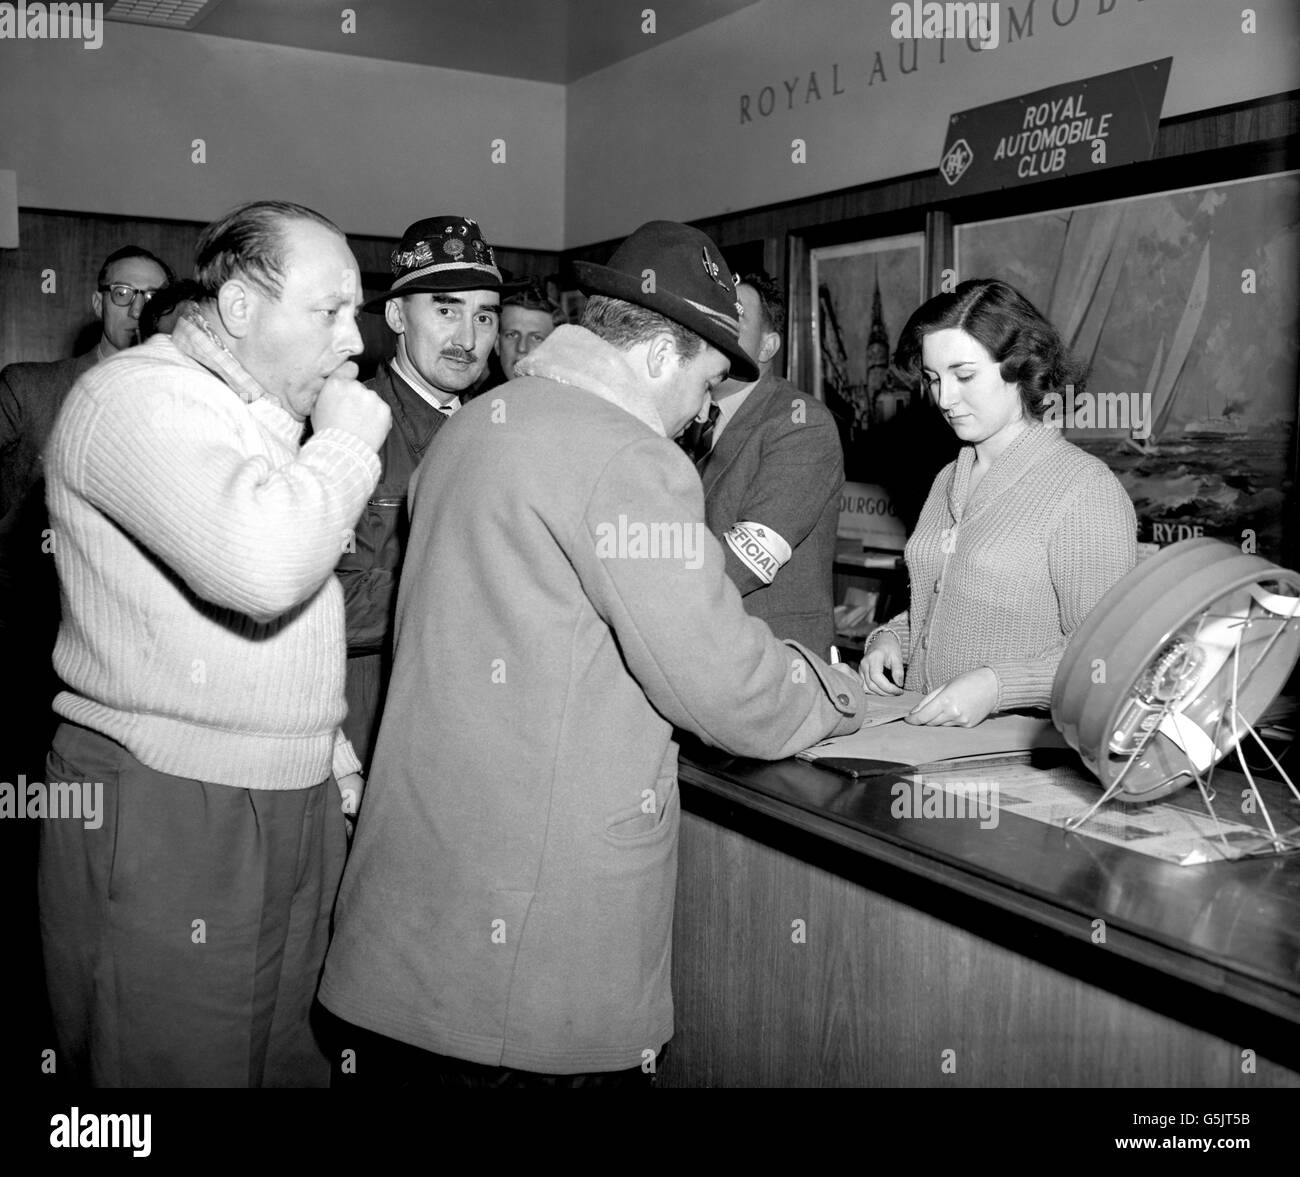 Eric Haddon of Buckinghamshire signs in at the ferry terminal in Dover, before heading to France to take part in the Monte Carlo Rally. On the left is Mr C Vivian, while behind the desk is Valerie Triggs, a Royal Automobile Club port official. Stock Photo